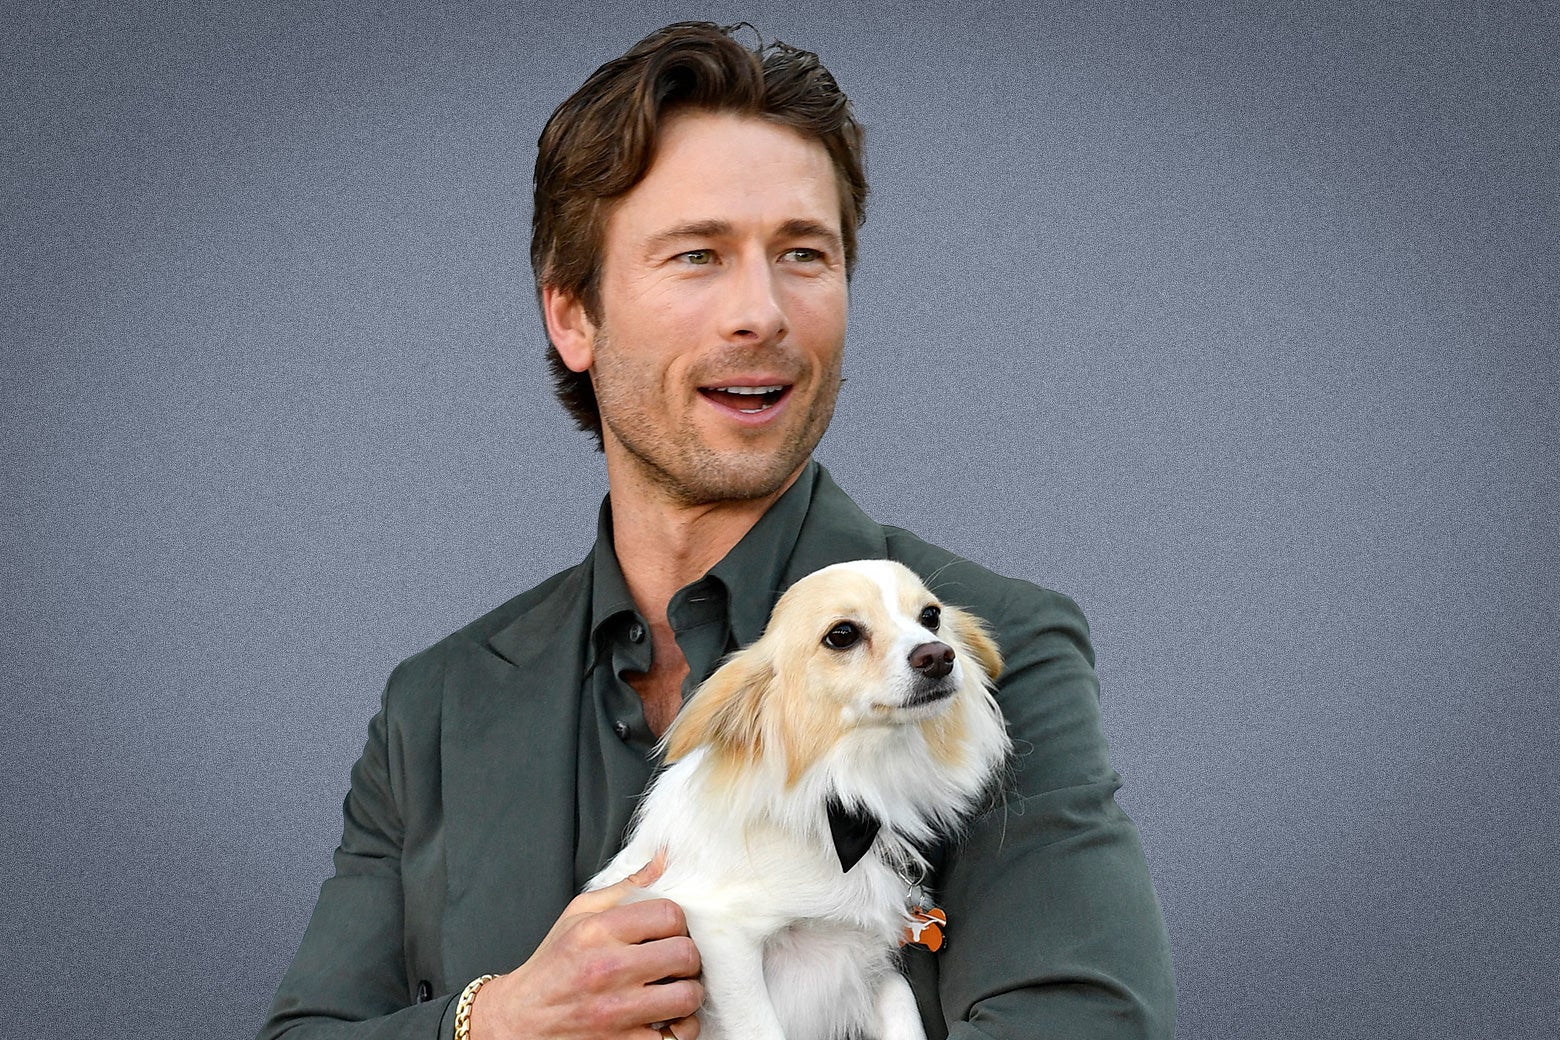 Glen Powell’s Dog Sure Is Cute. But There’s One Little Problem.